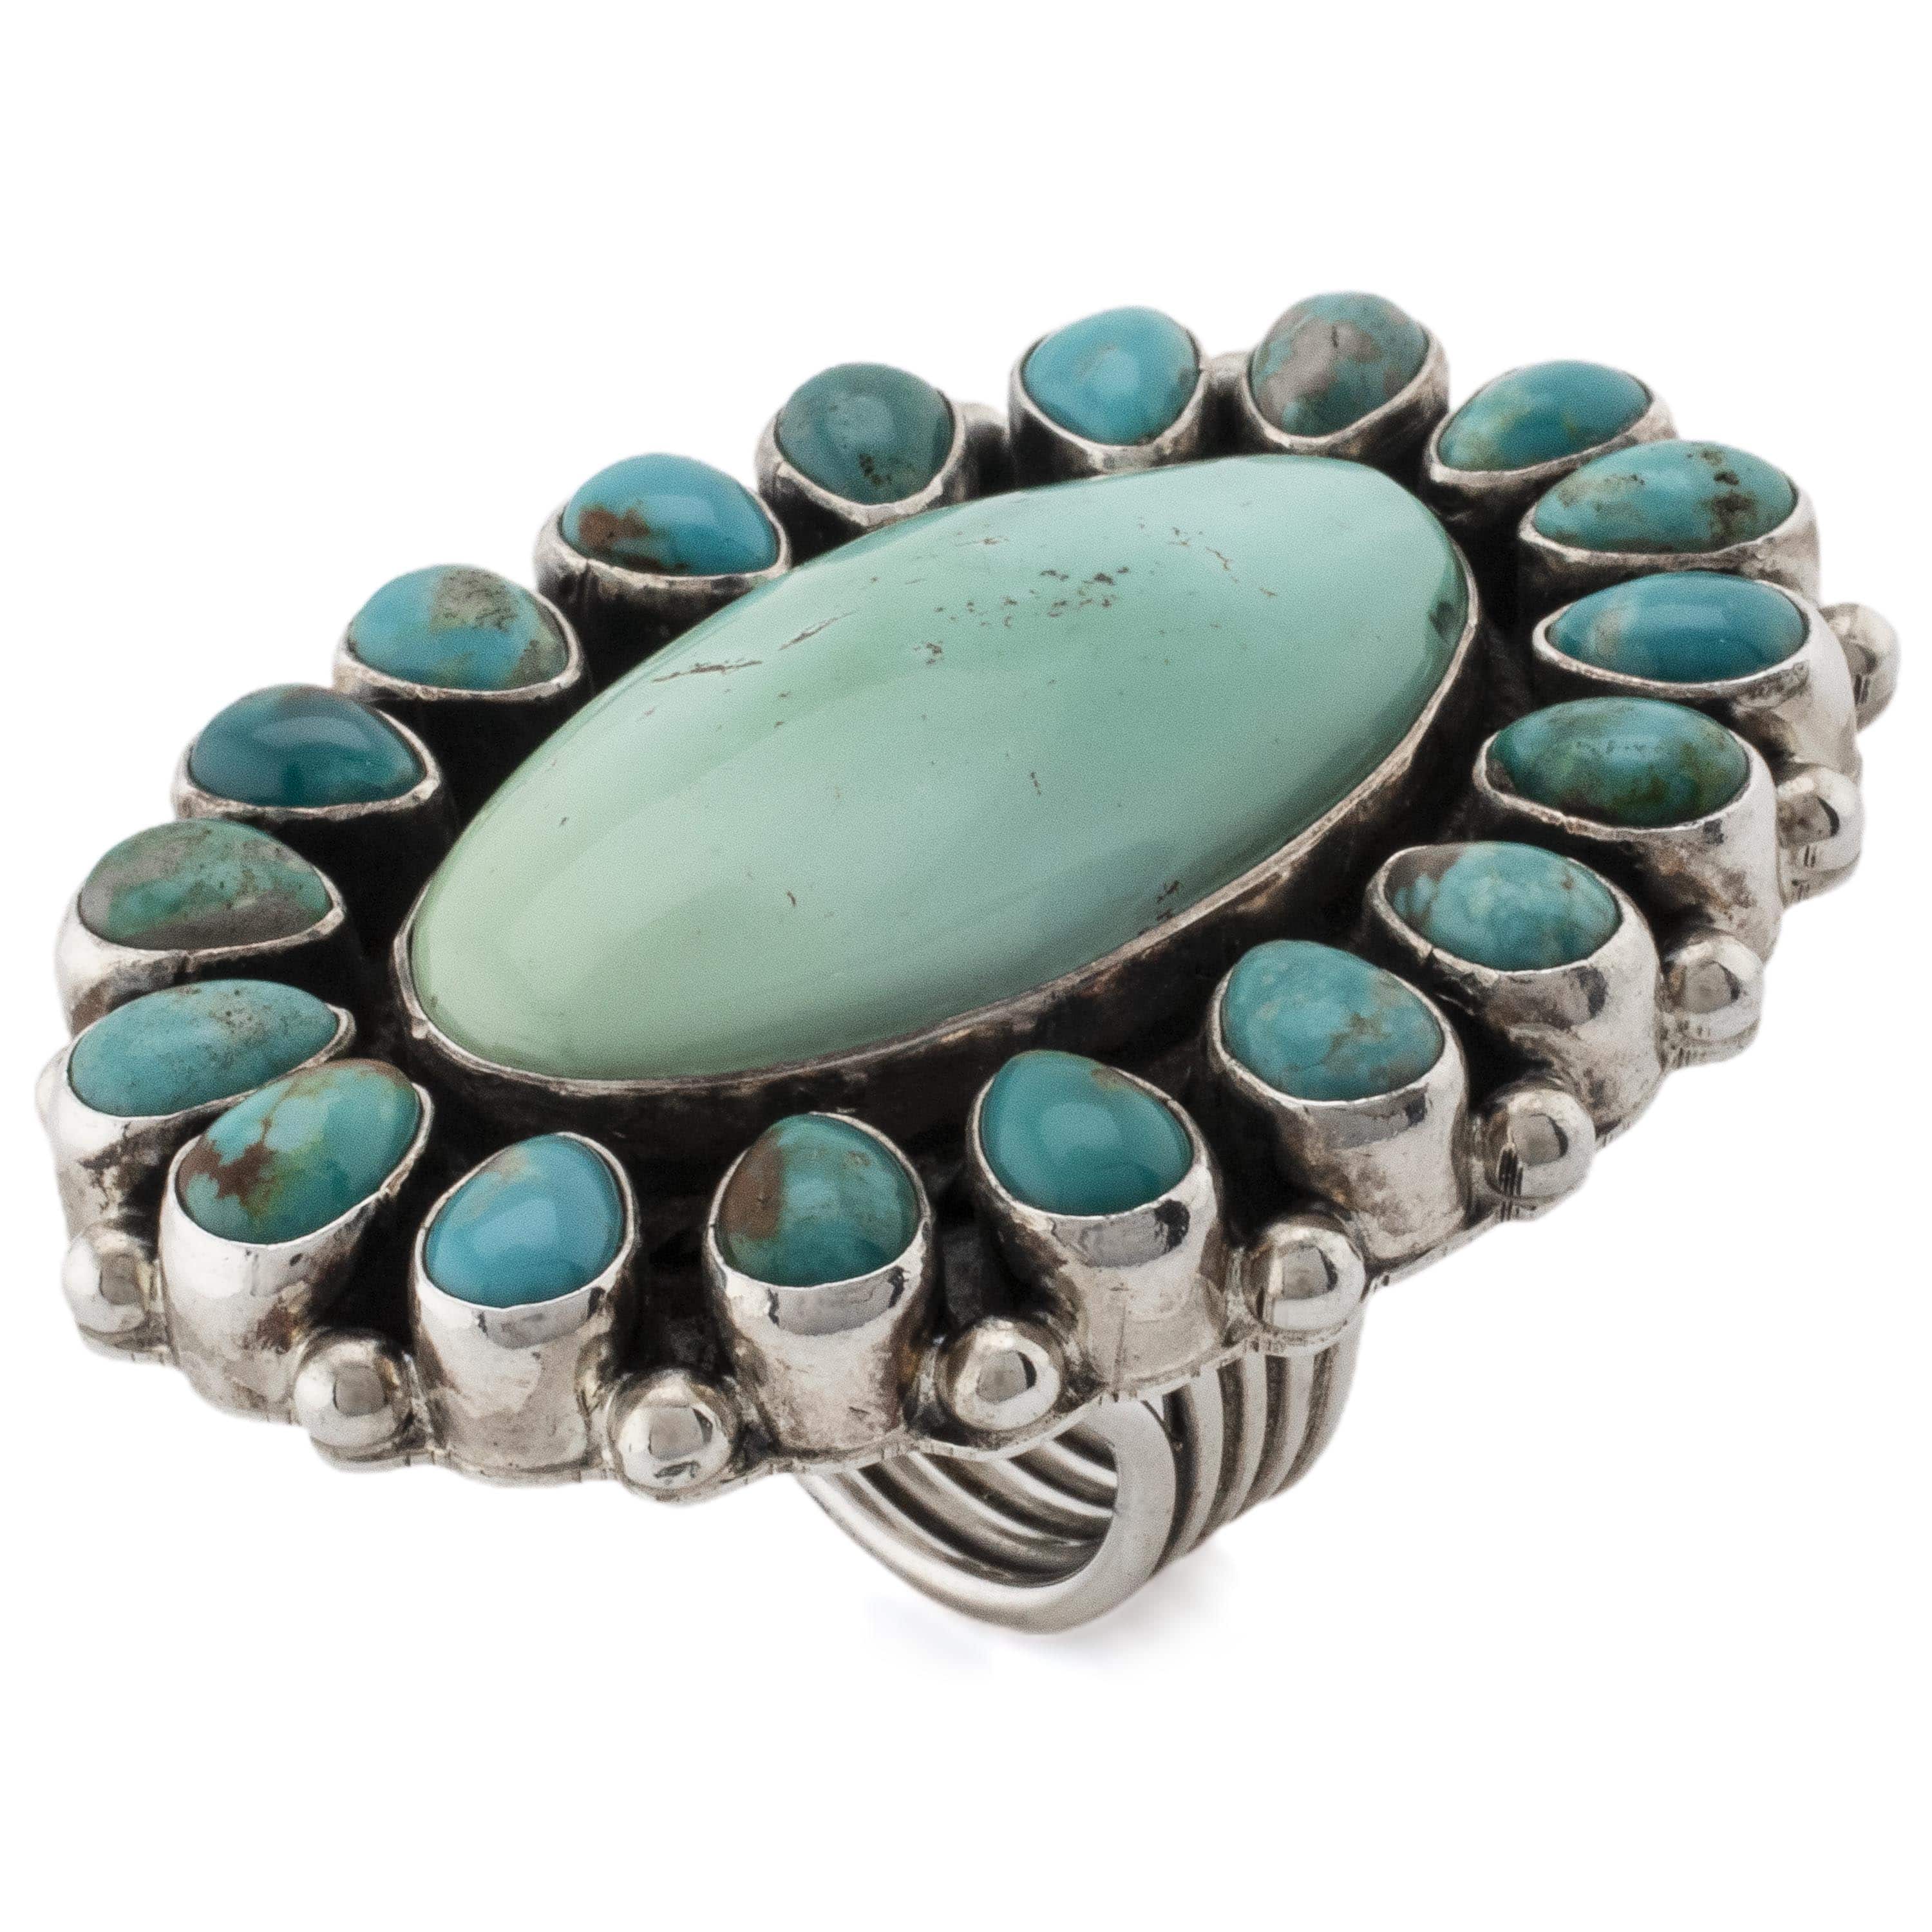 Kalifano Native American Jewelry 7 Kathleen Chavez Fox and Royston Turquoise USA Native American Made 925 Sterling Silver Ring NAR2400.002.7